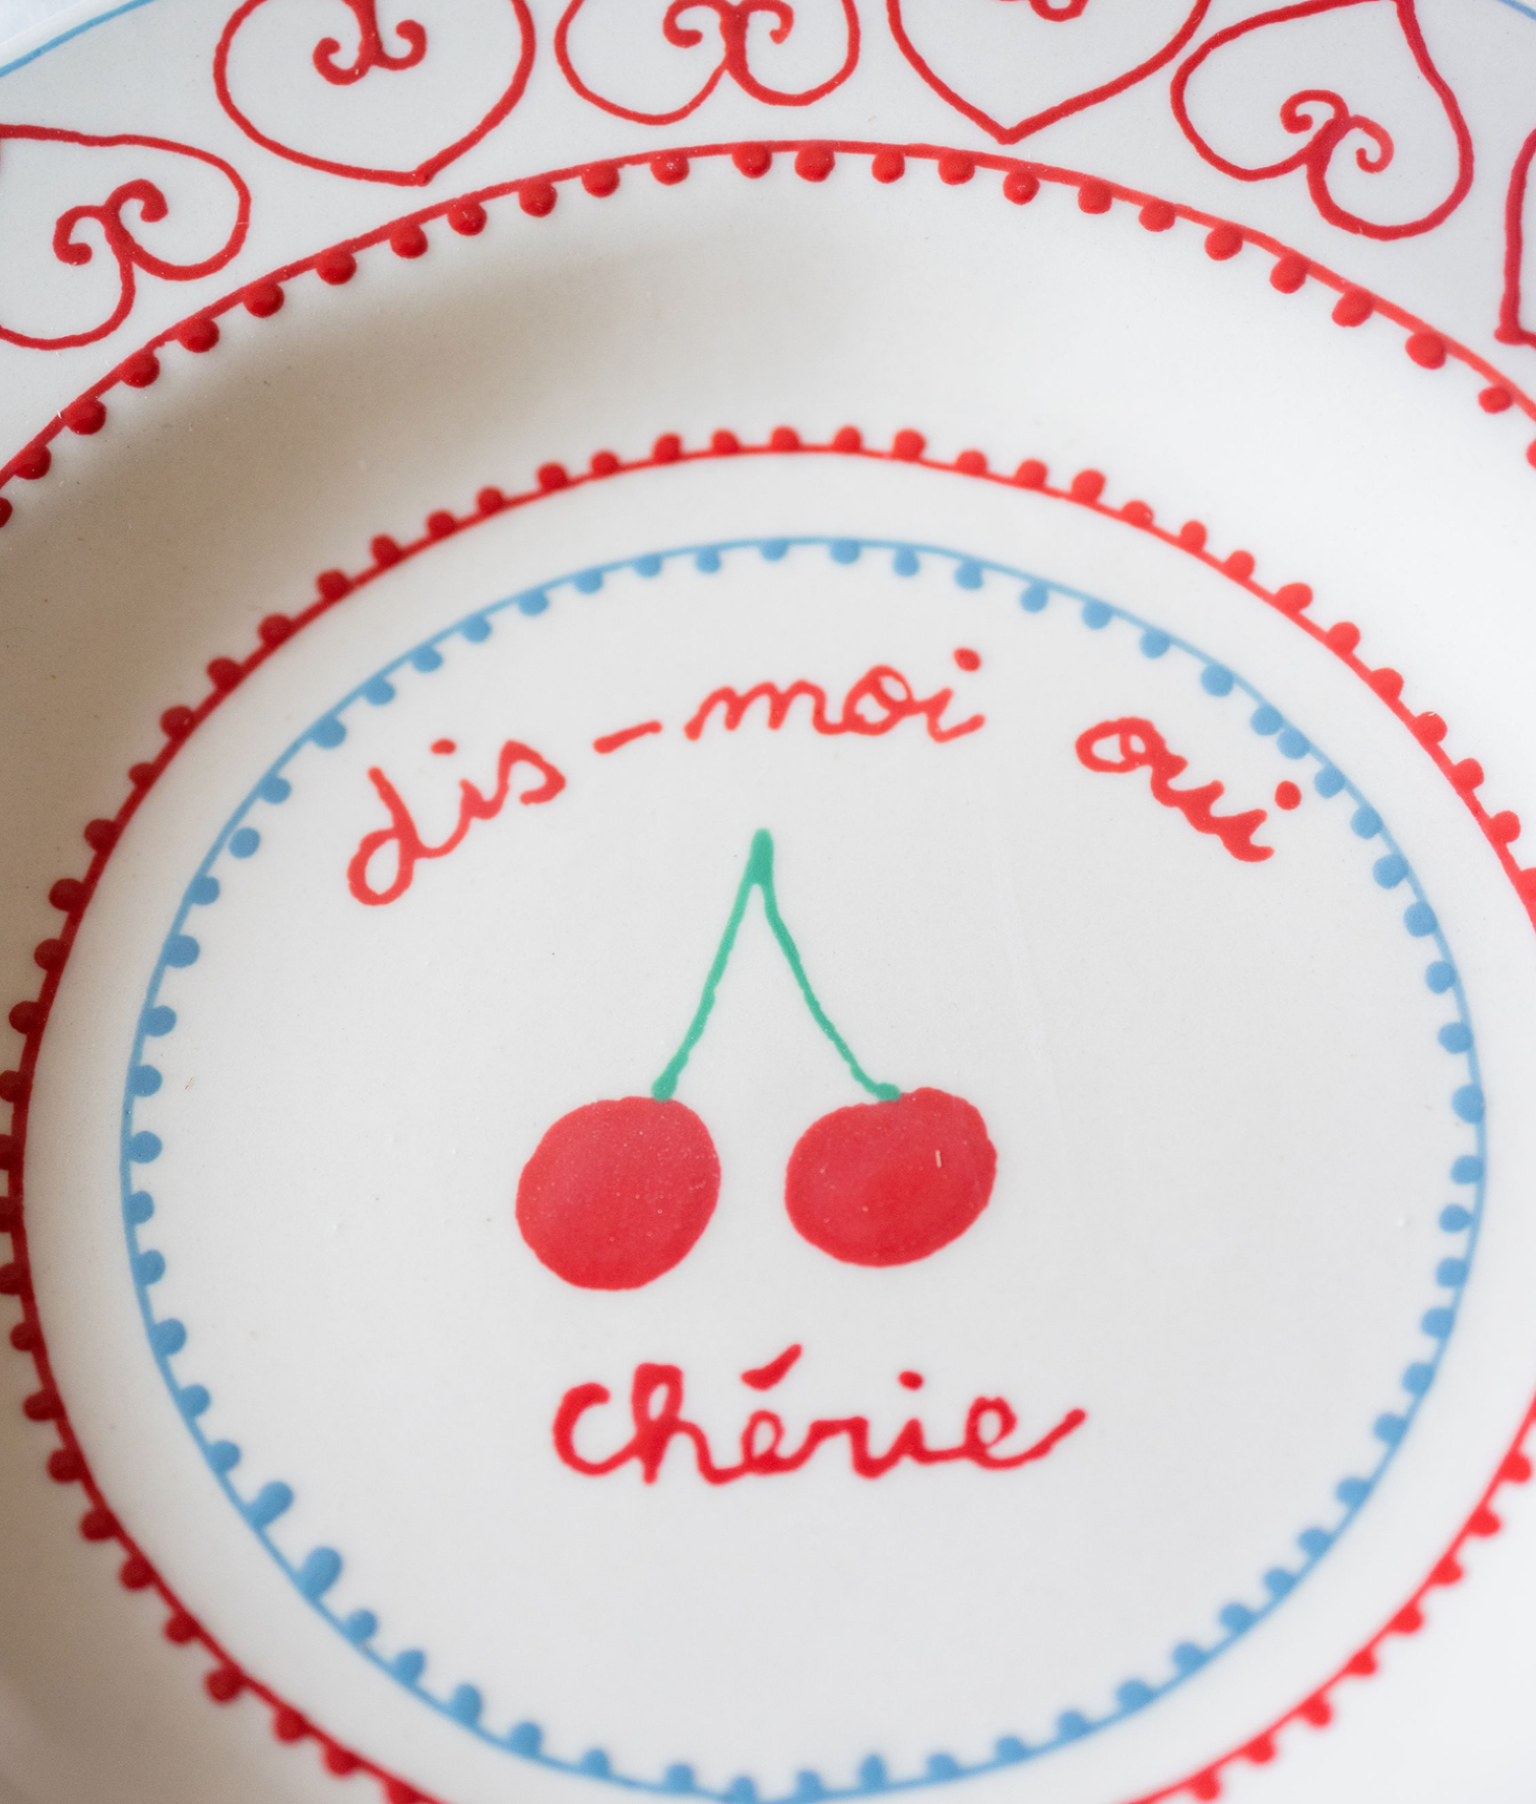 Cherie Small Plate